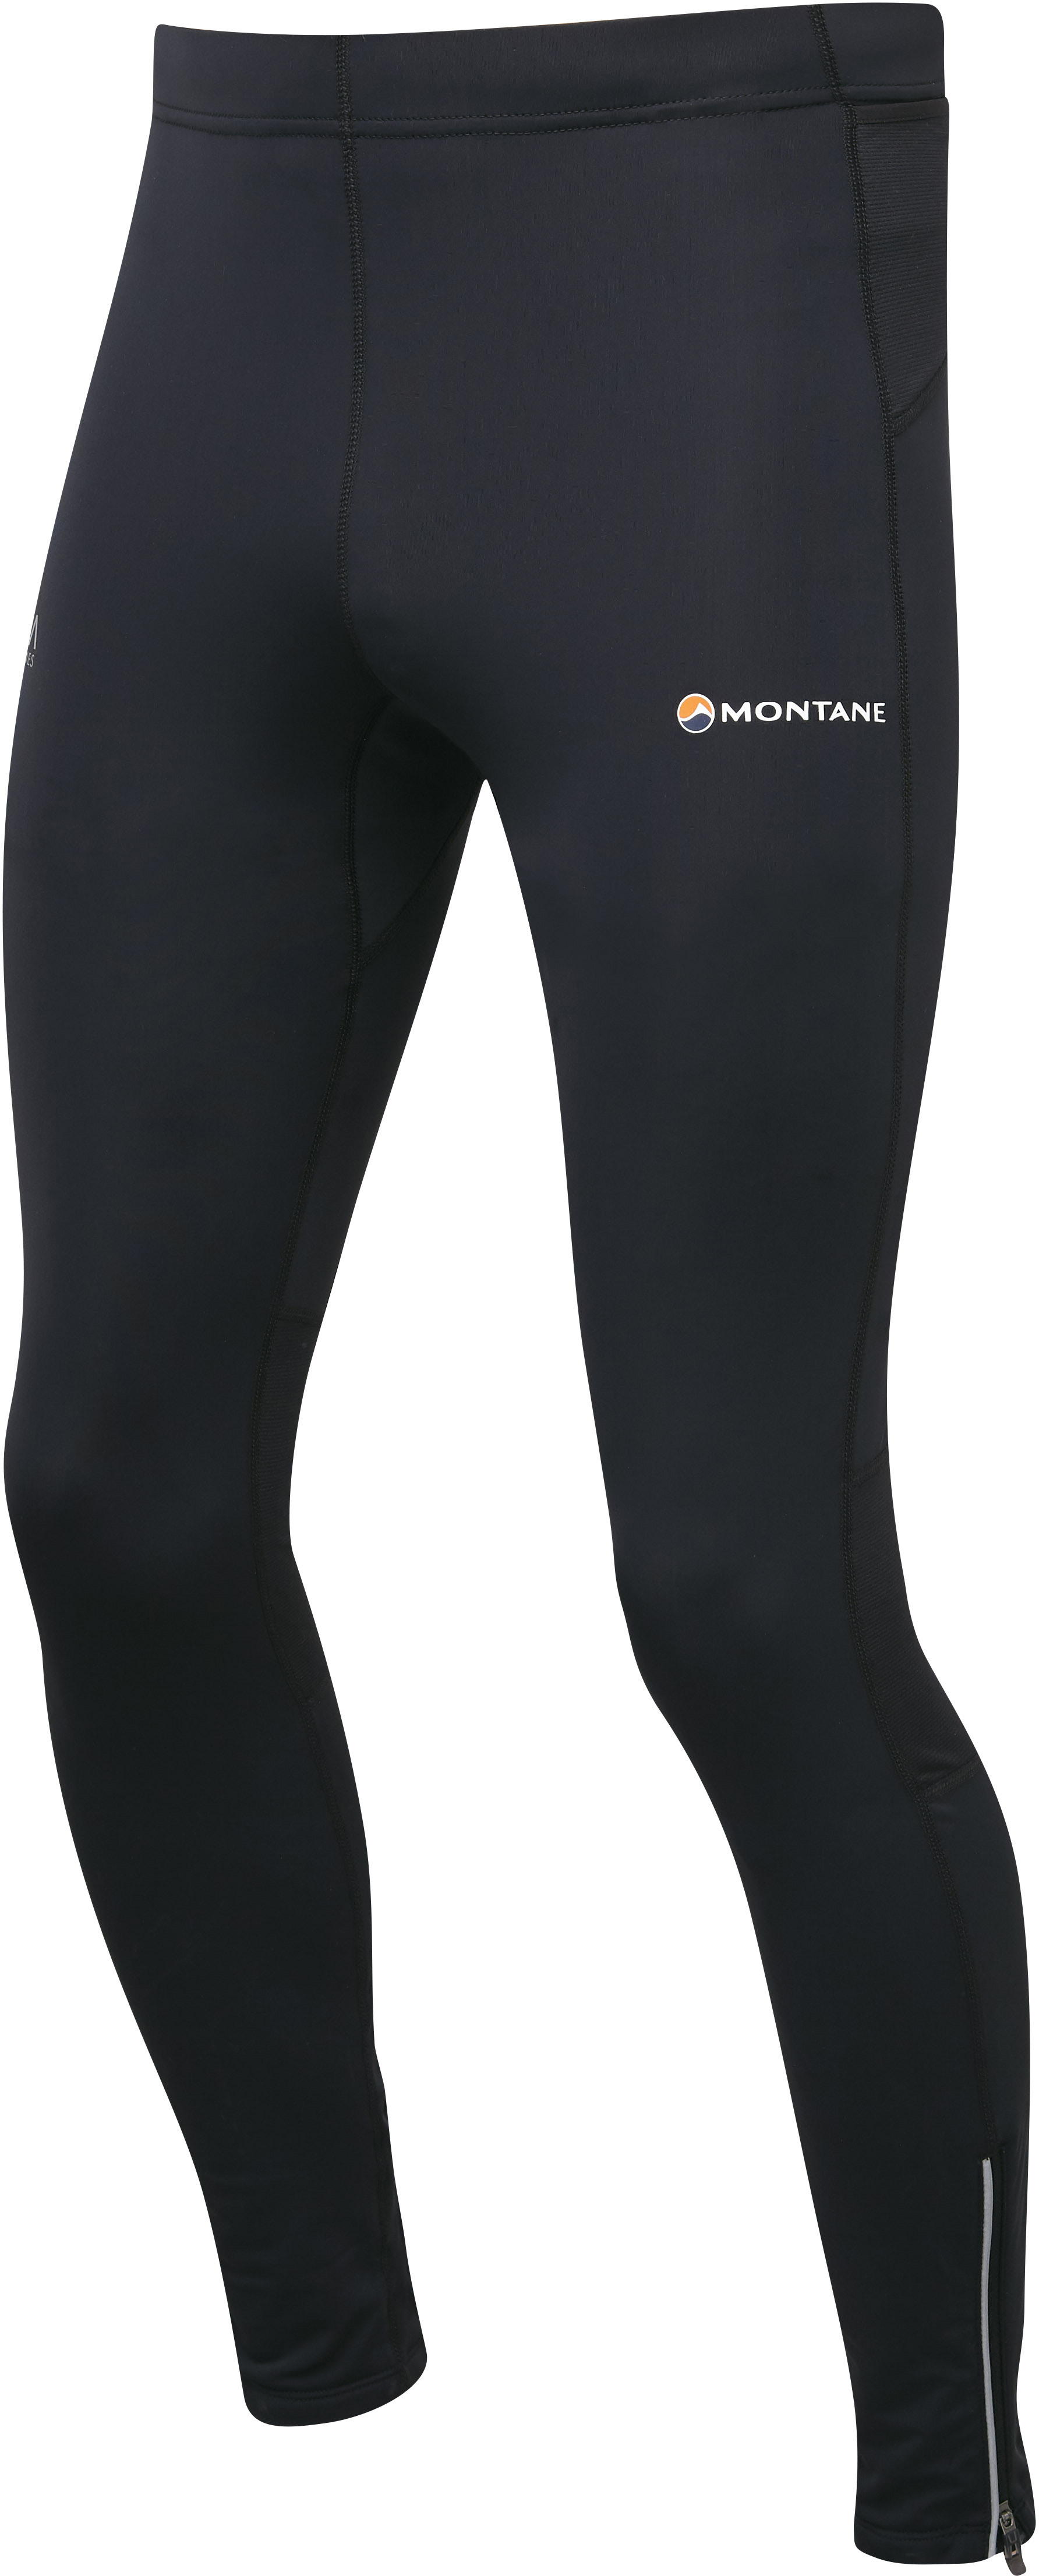 Montane Trail Series Quick Dry  Men's Running Tights